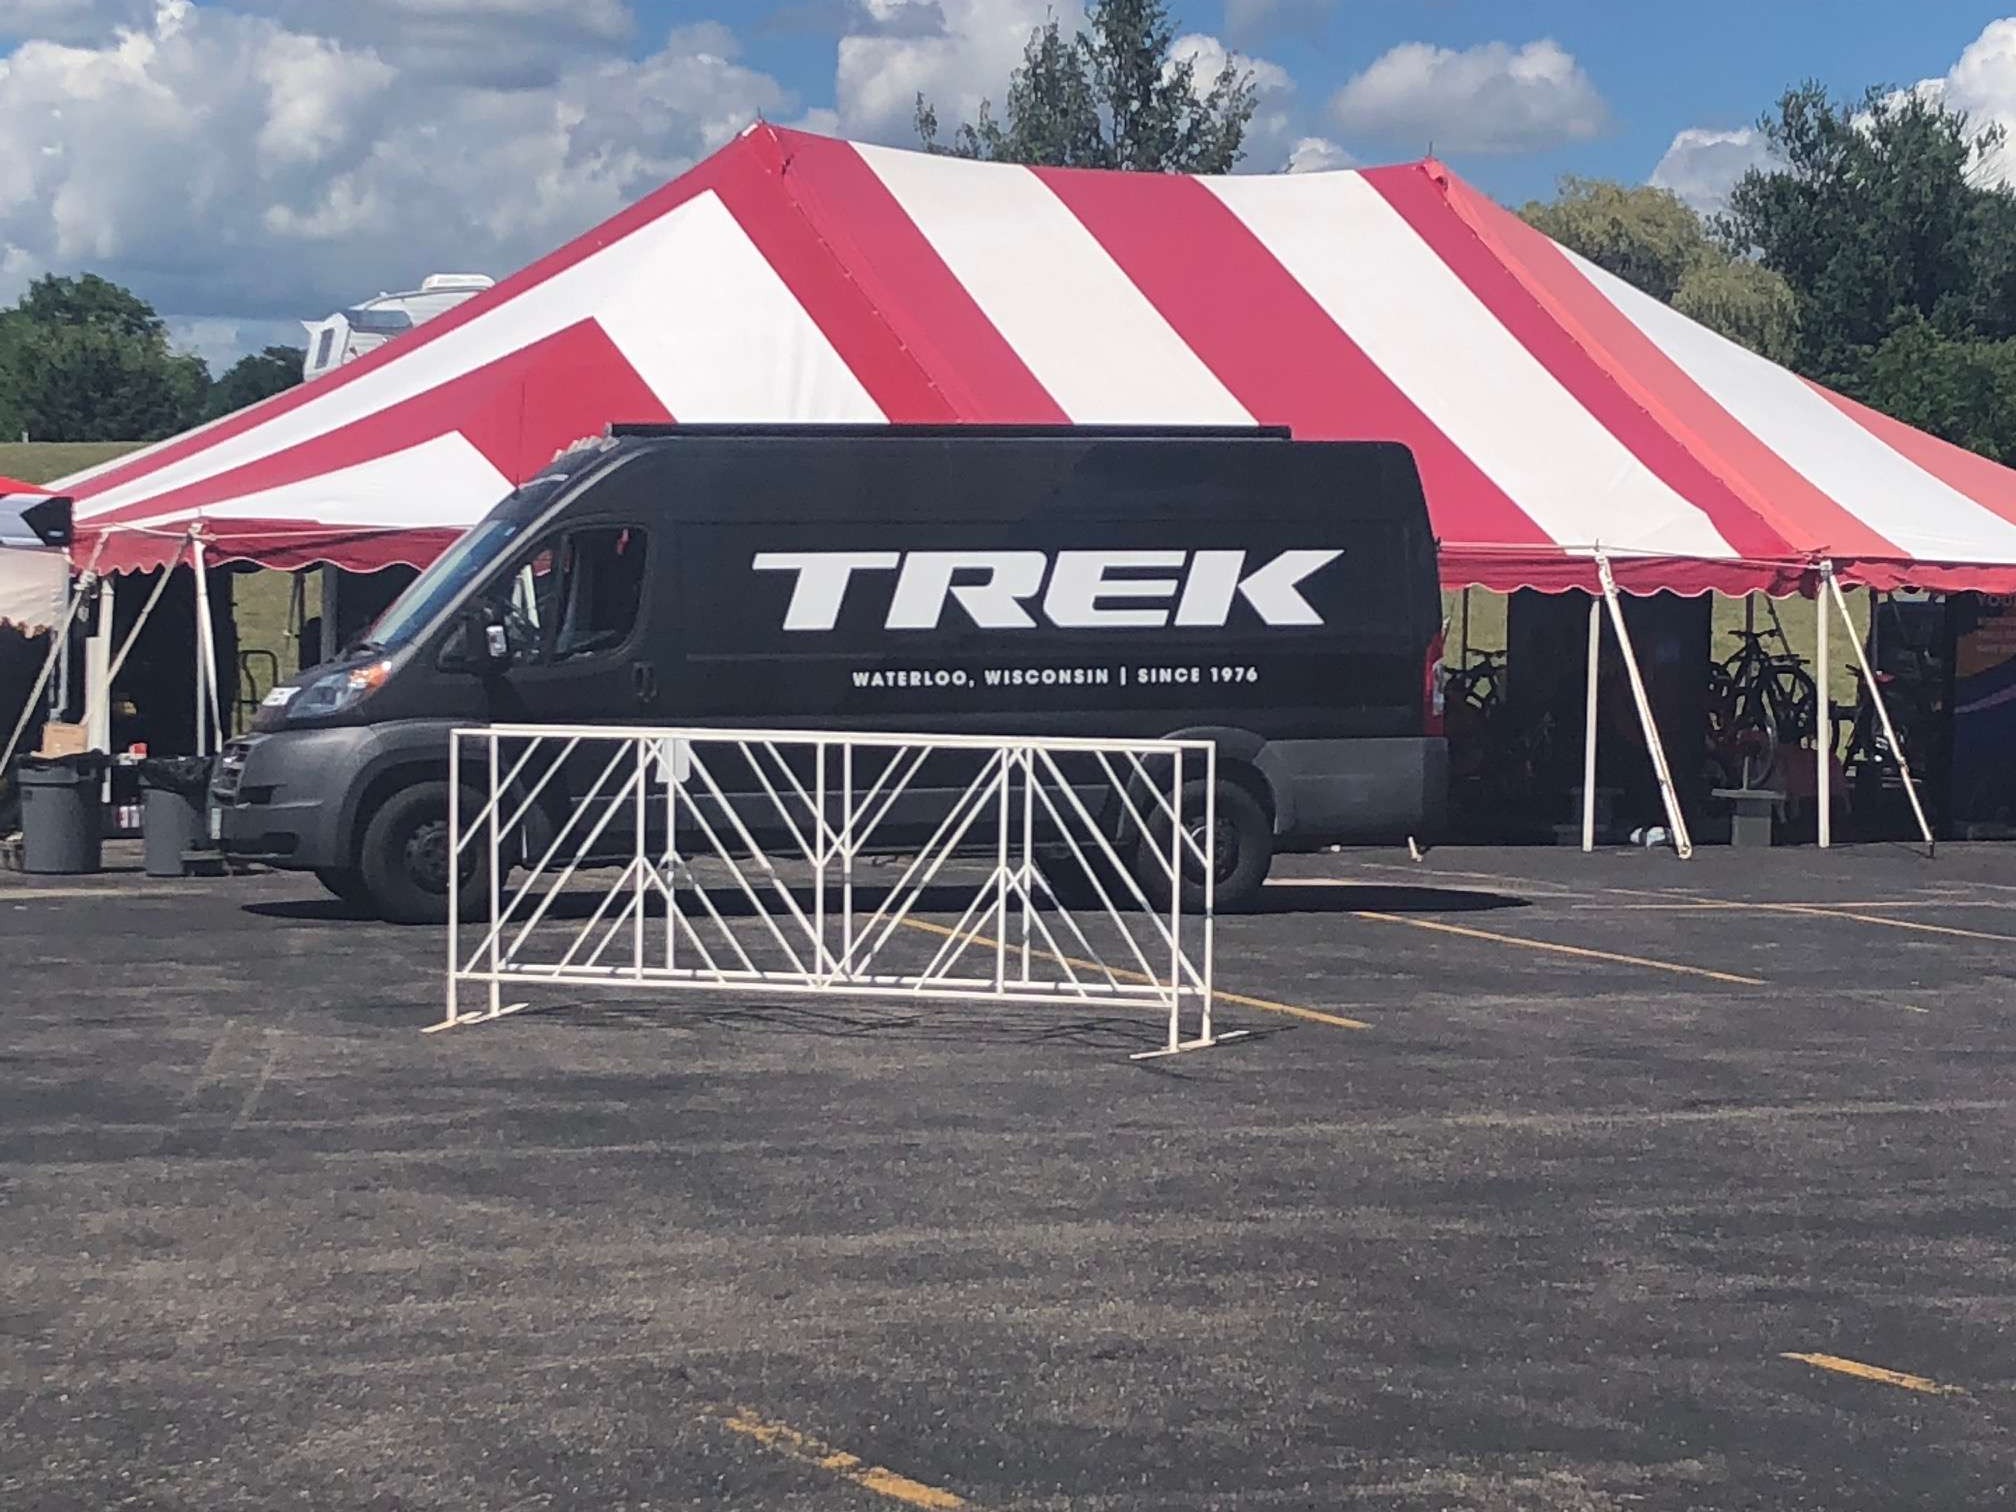 Black Trek van in front of tent as it sets up for the events